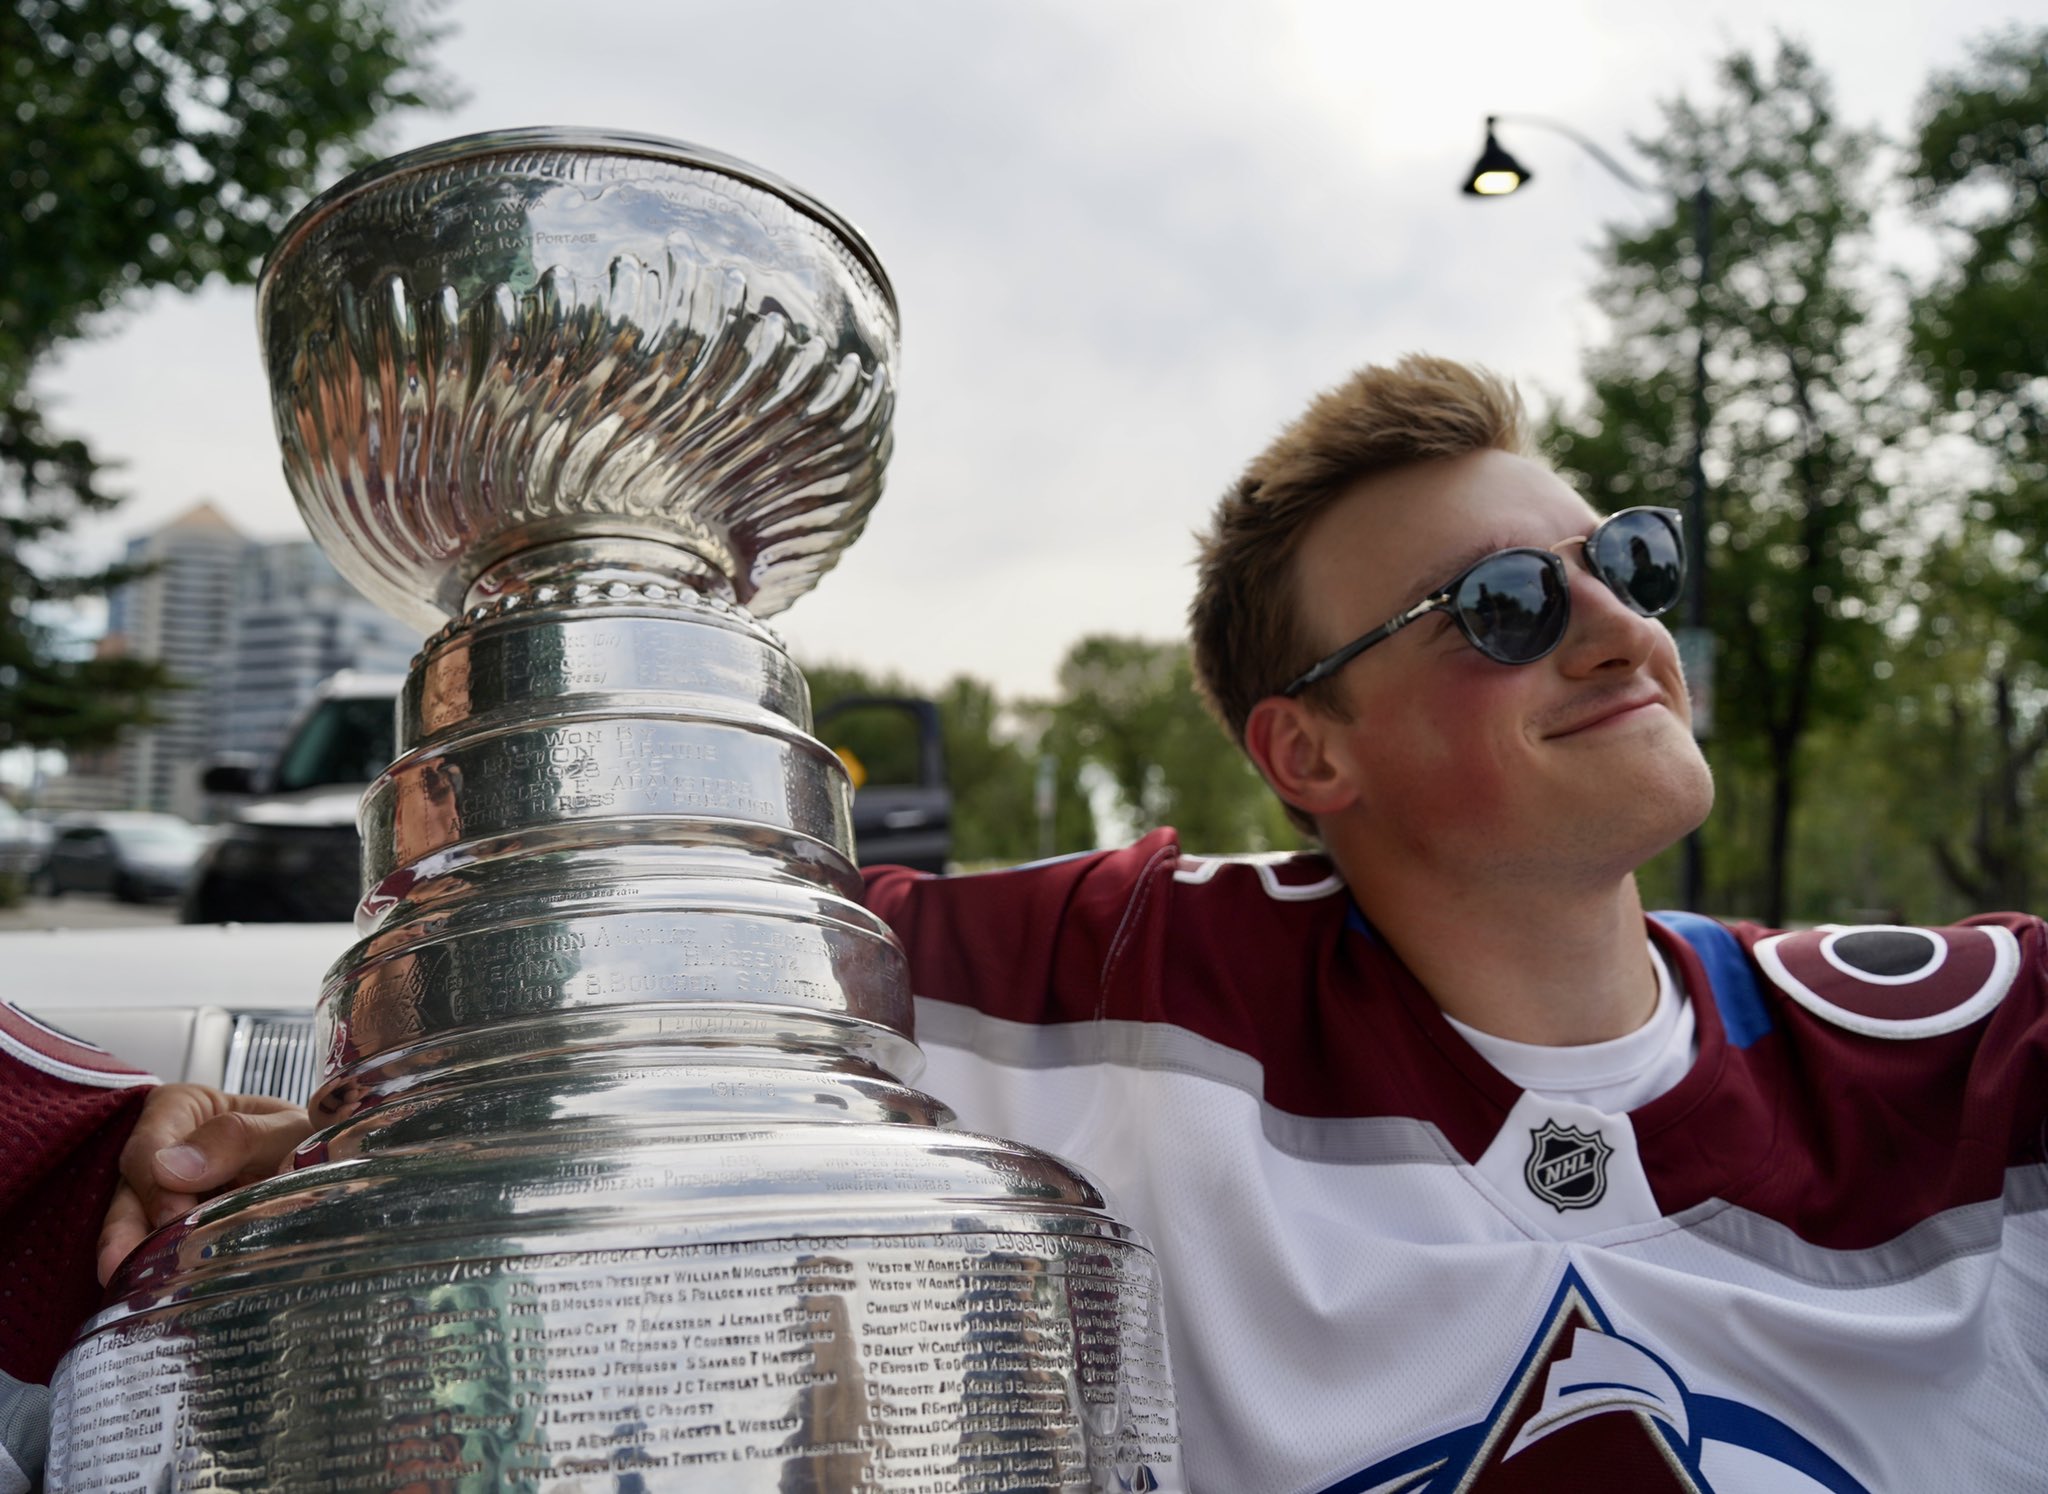 Cale Makar soft smiling with his arm around the Stanley Cup in a convertible. He is wearing his Avalanche jersey and has sunglasses on.